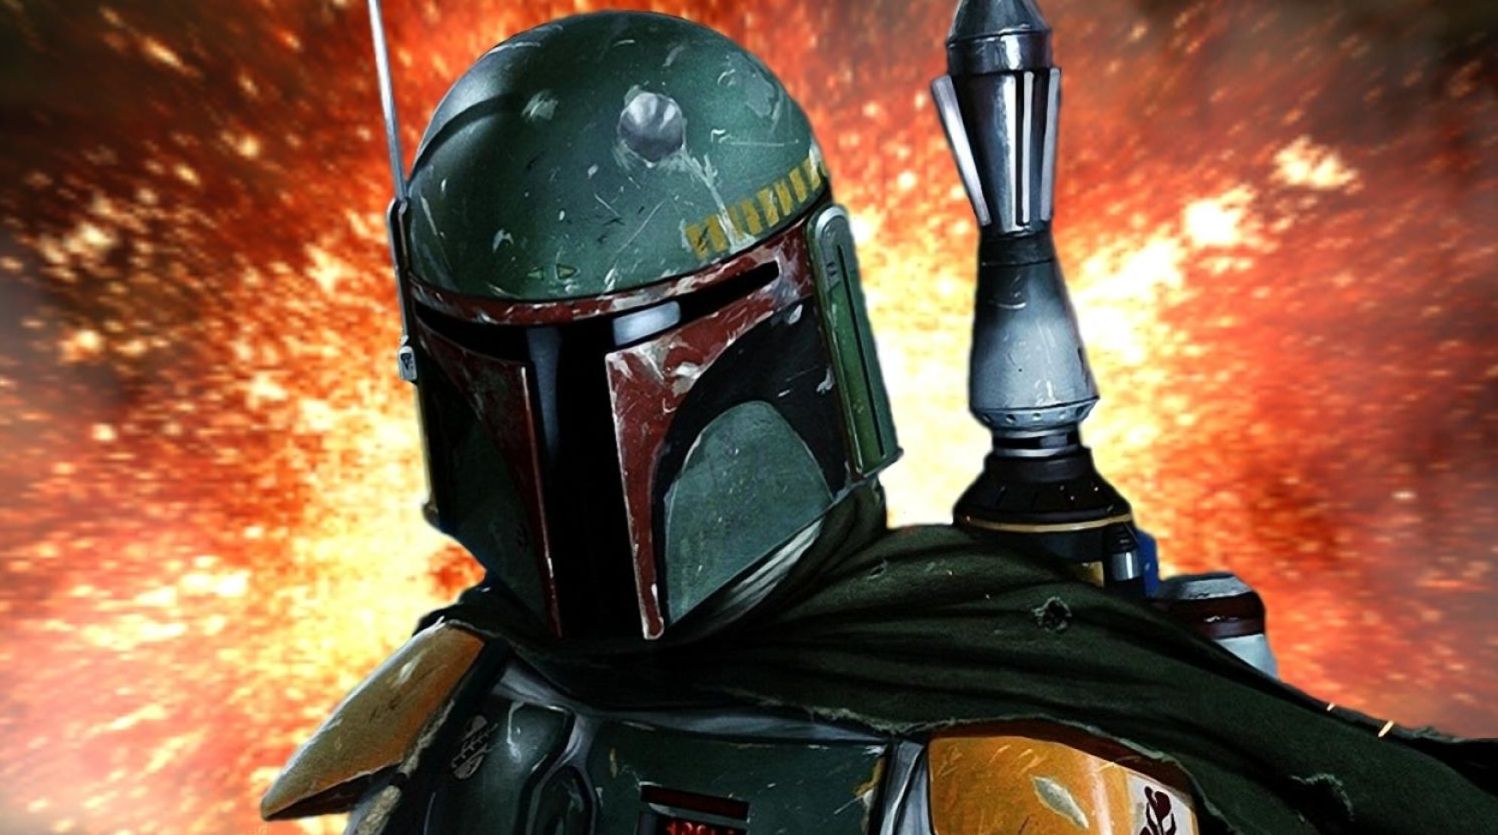 The Book of Boba Fett special effects